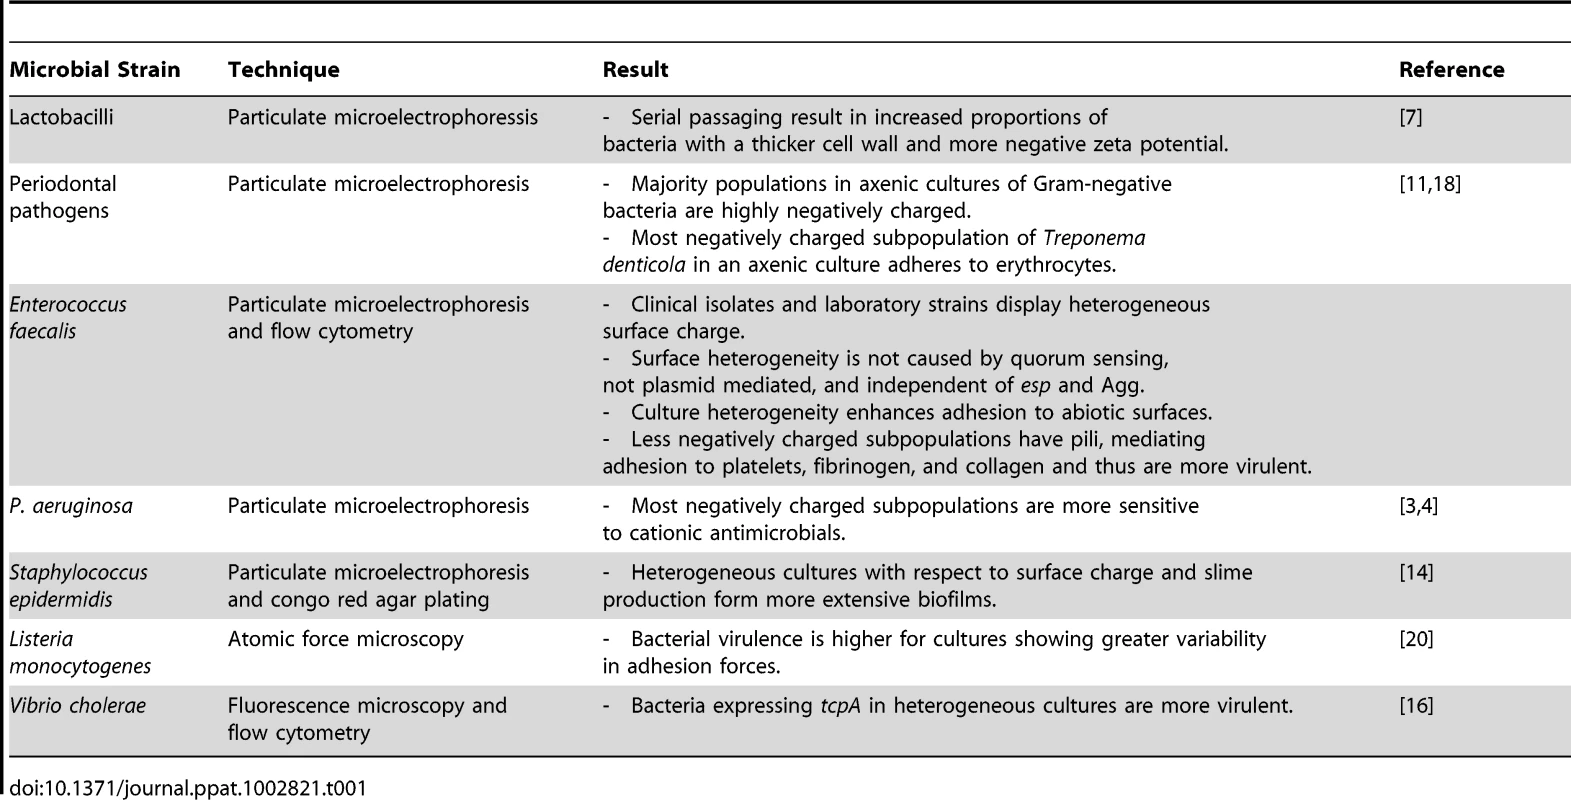 Summary of microbial strains for which clonal subpopulations expressing phenotypes with different cell surface properties have been found.